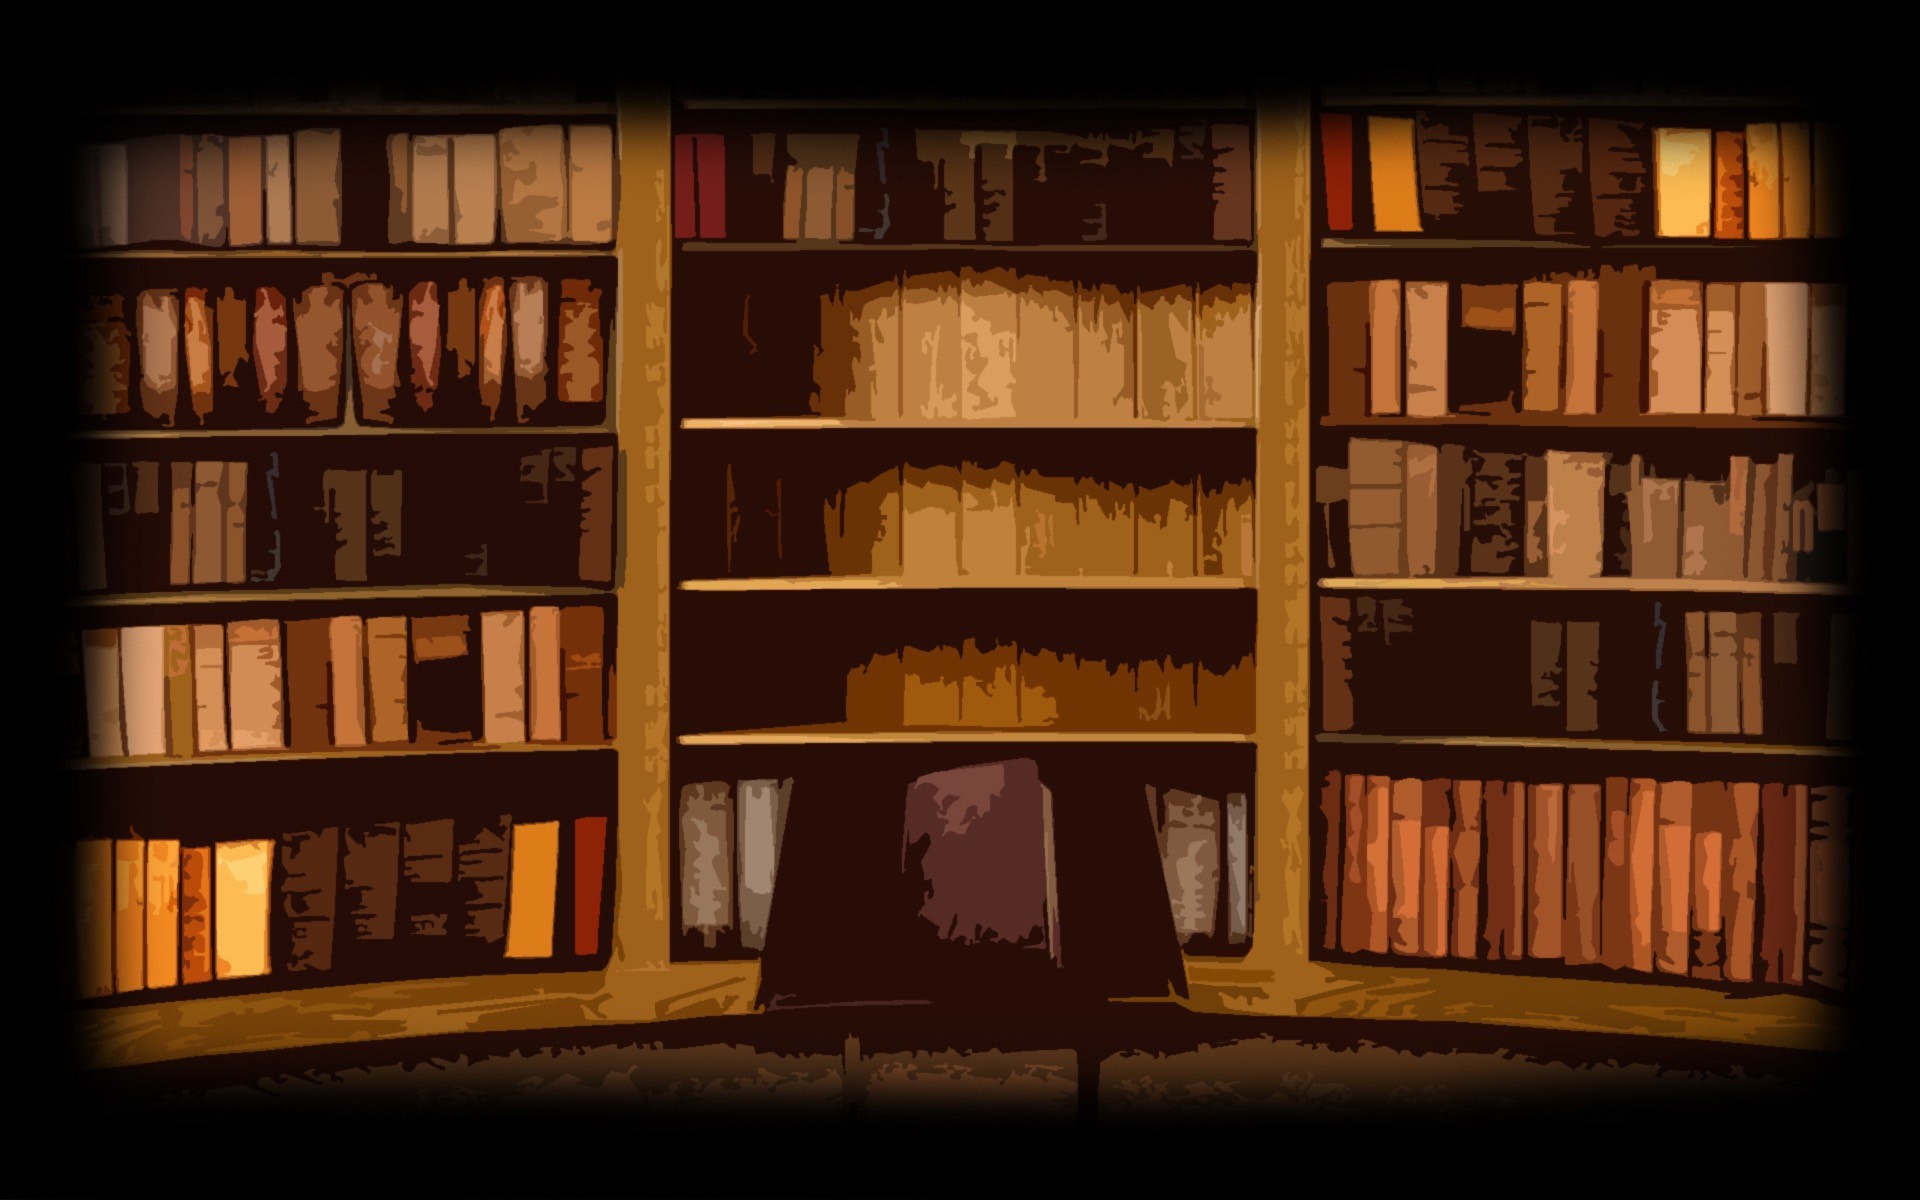 Library Background Images (50+ images)